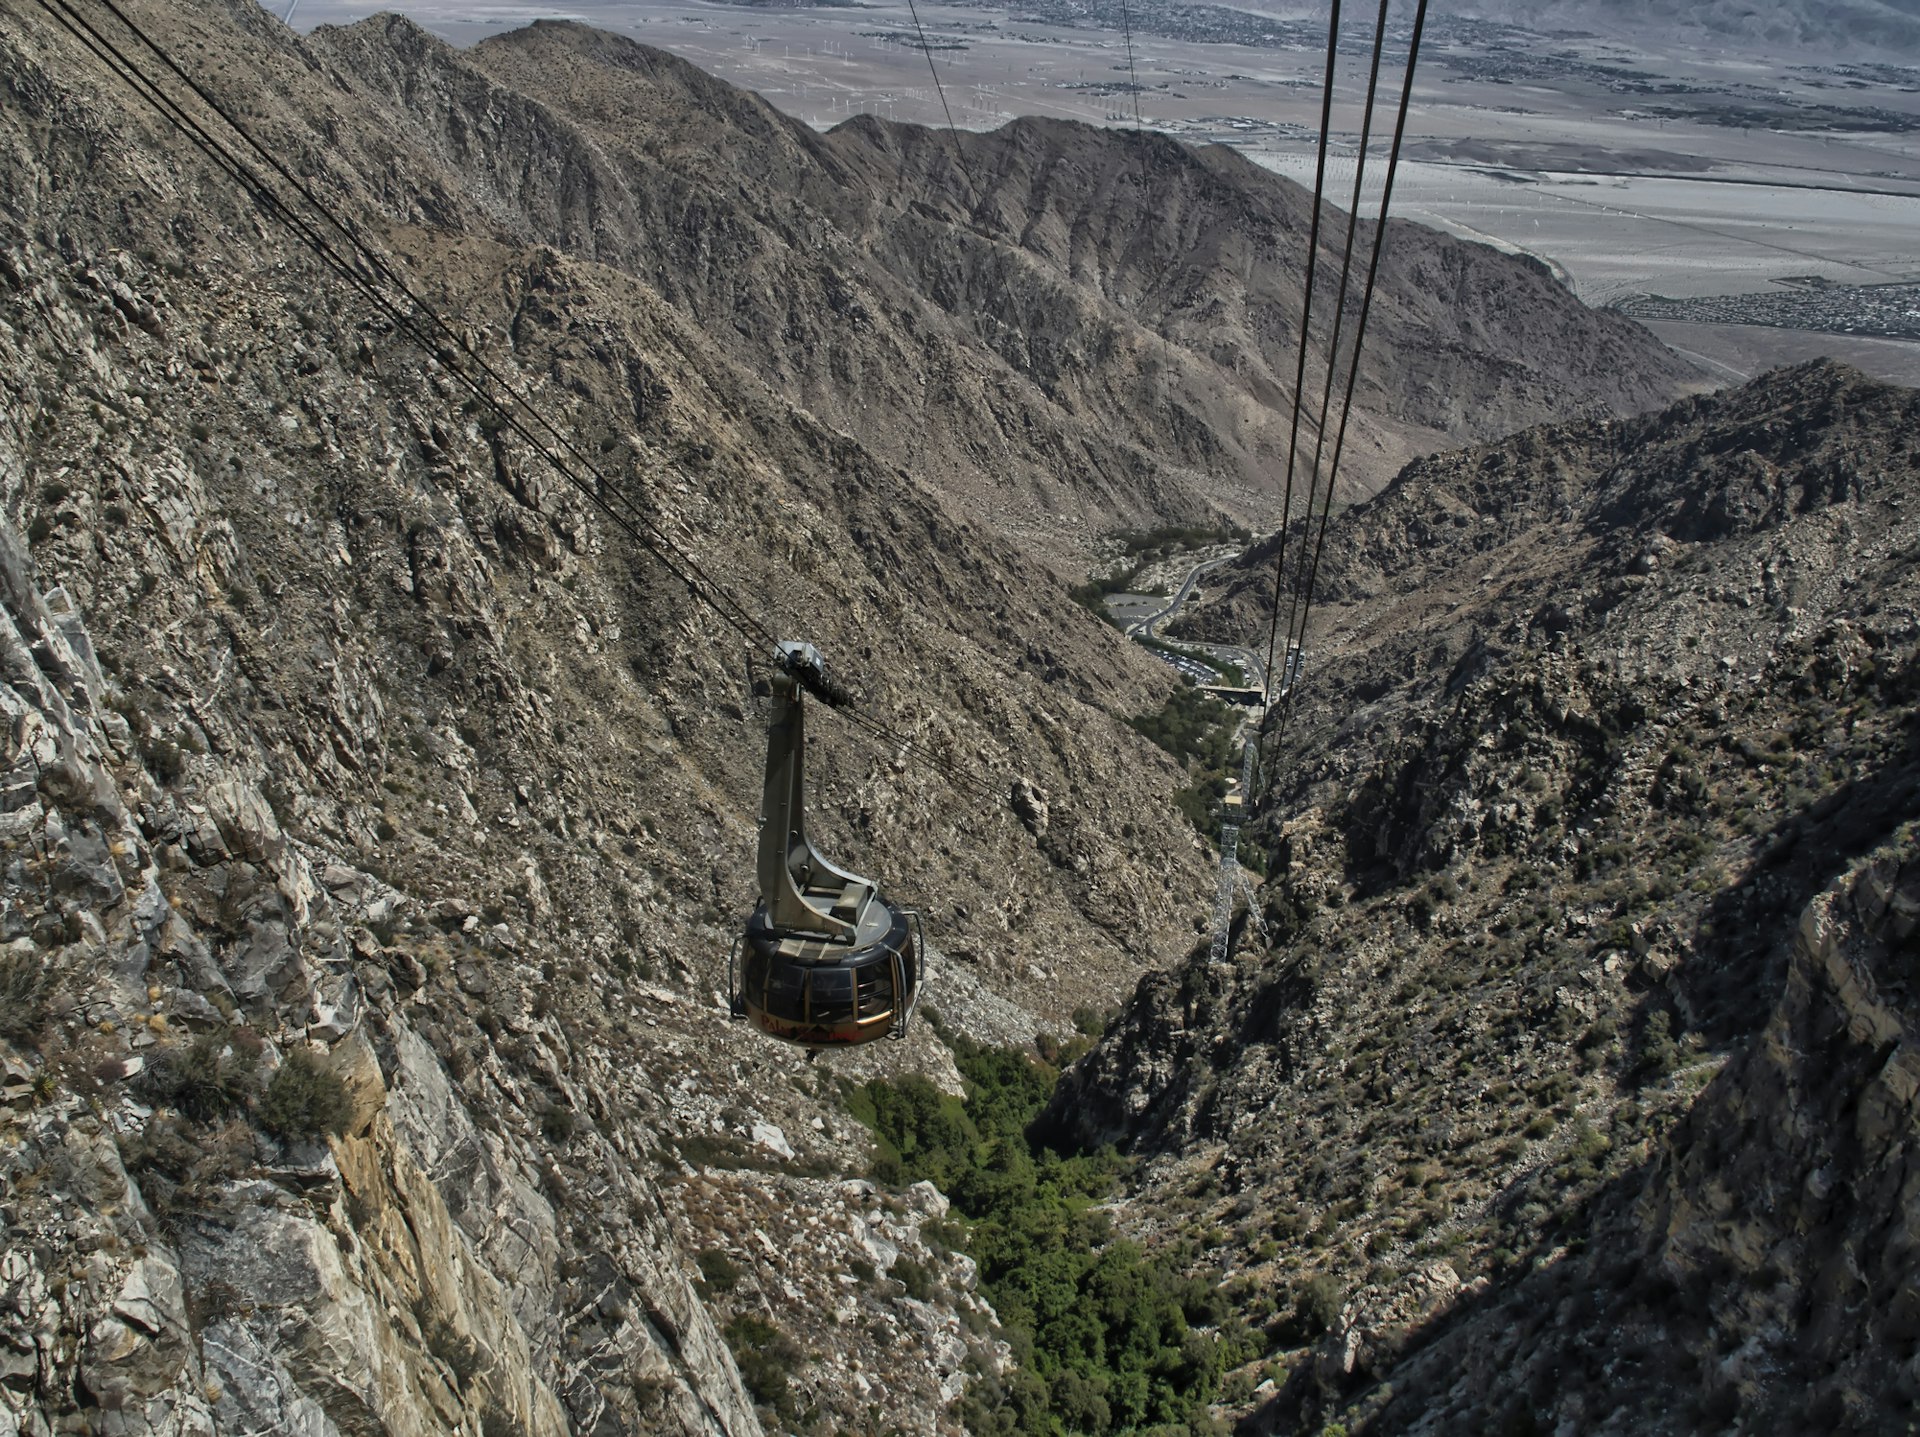 A cable car follows the route of a cleft in the rocks in a vast rocky desert landscape